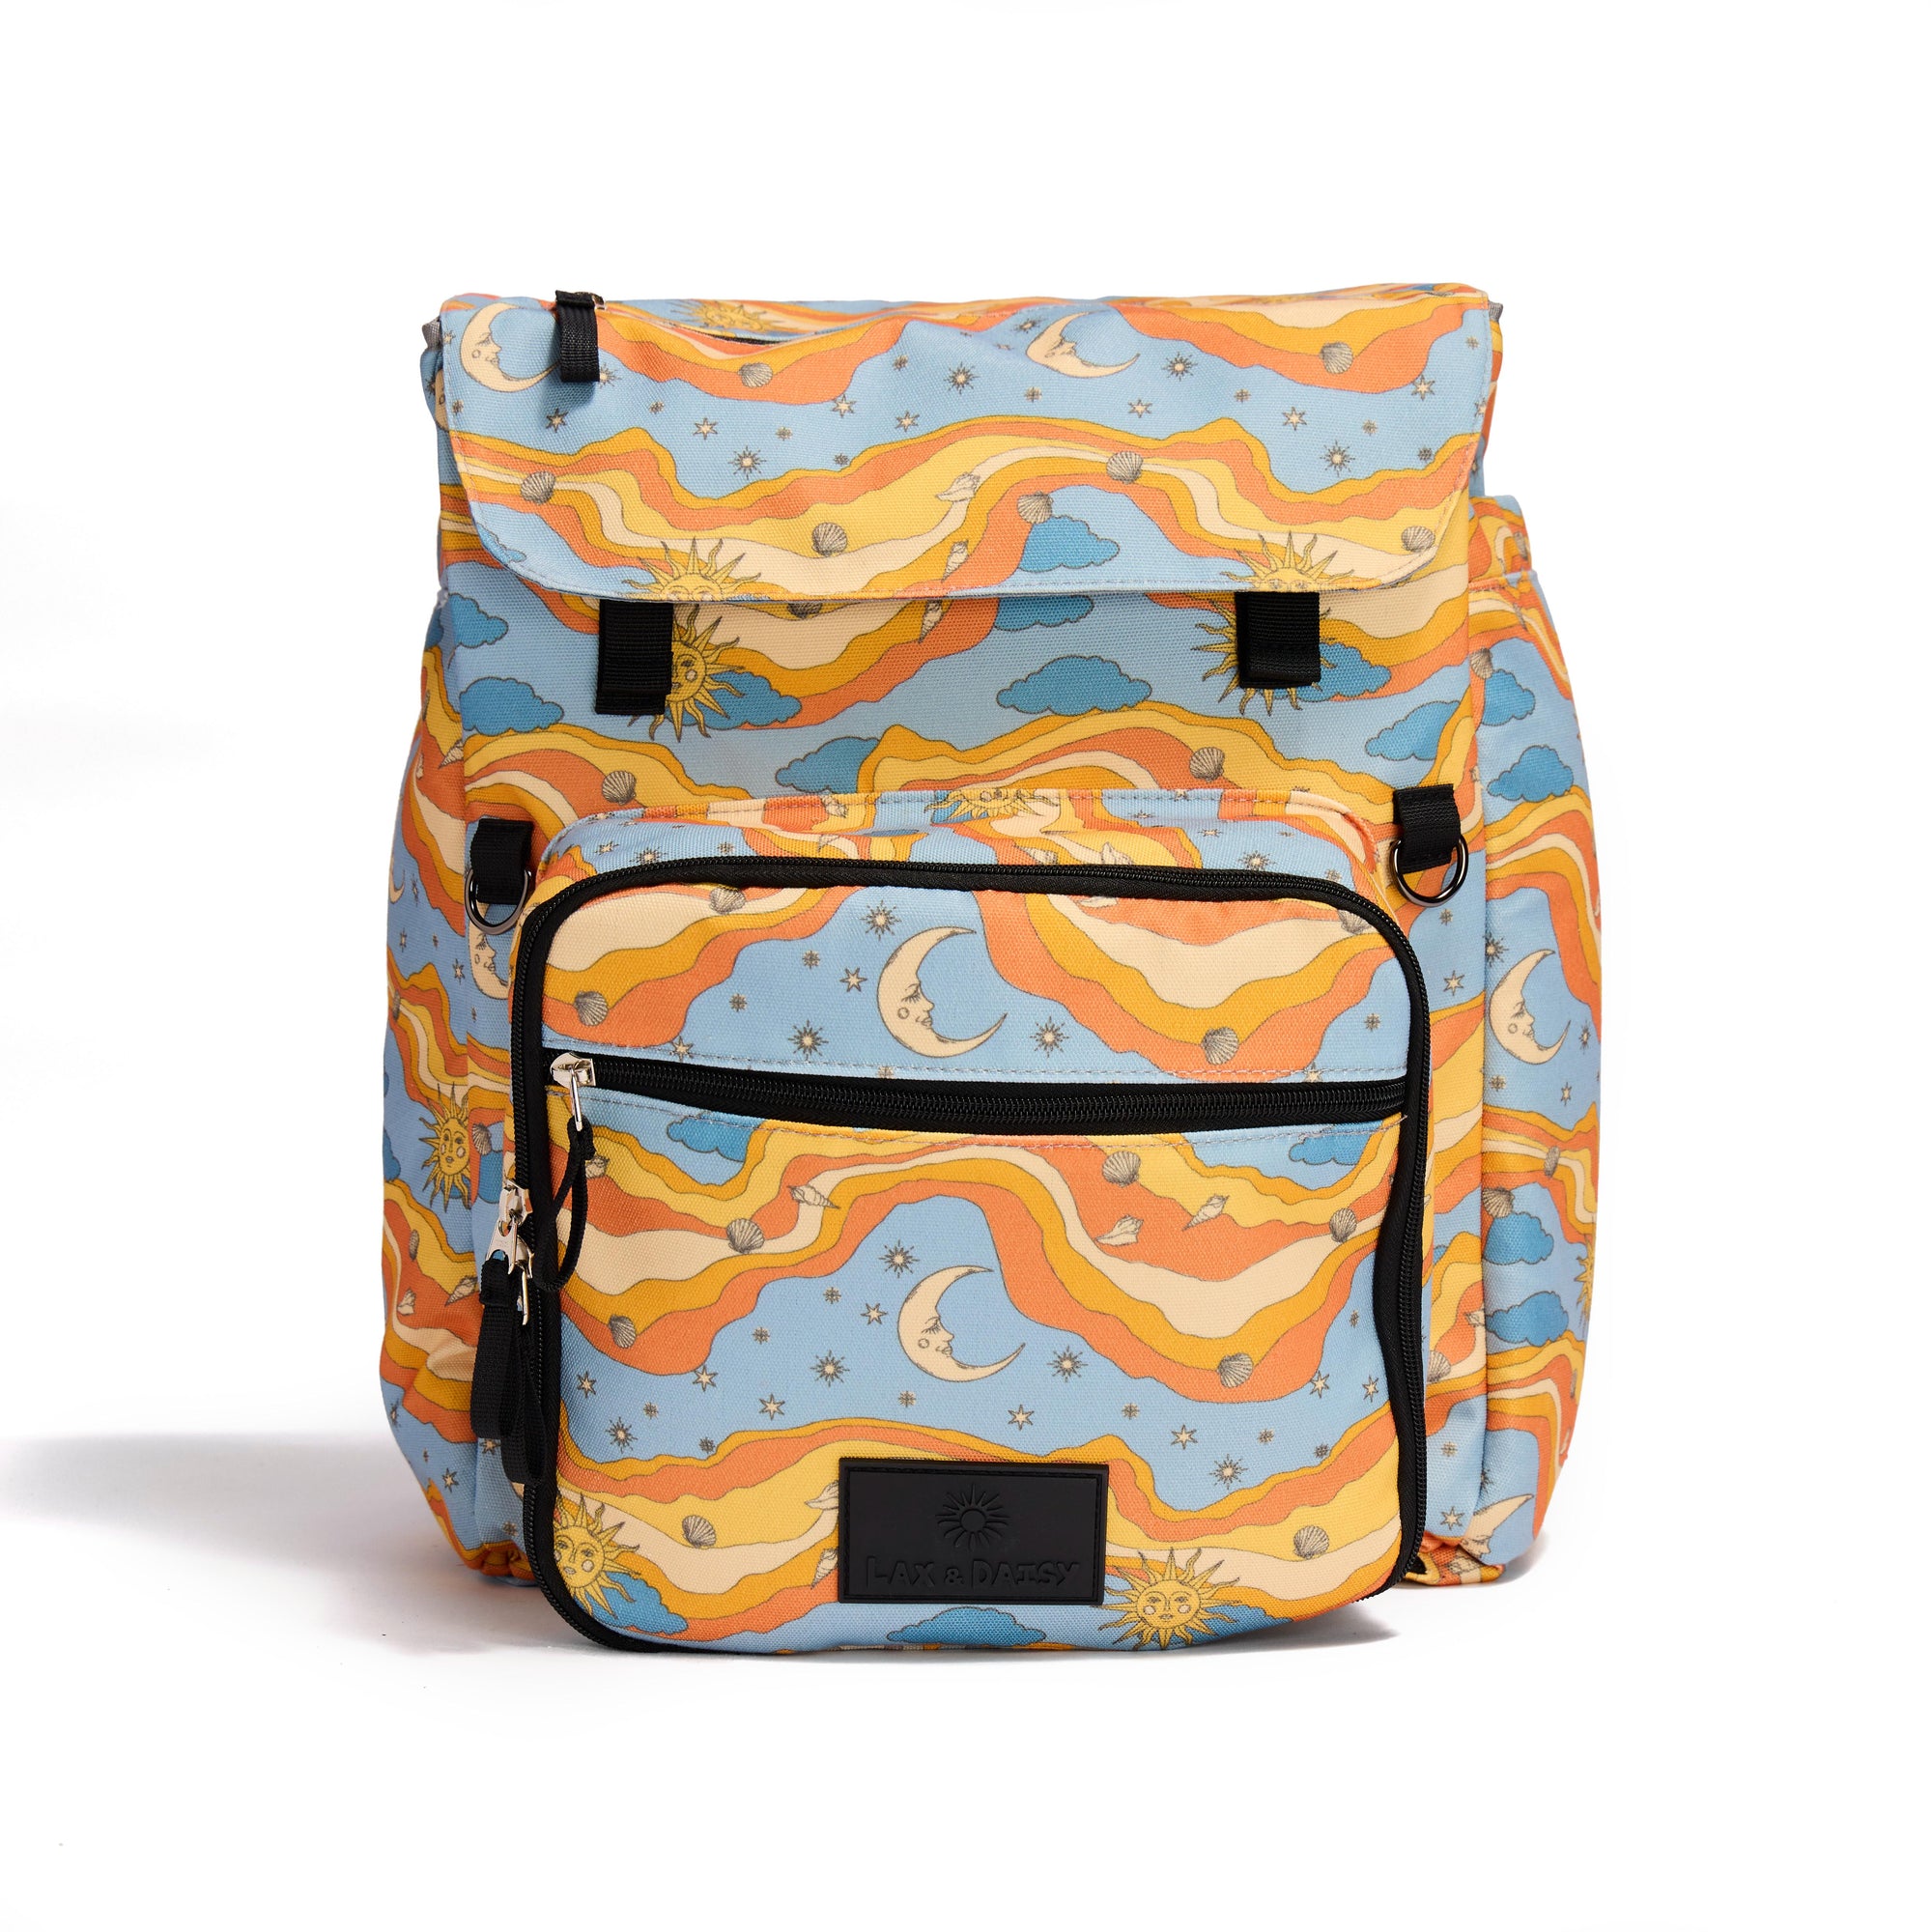 Luxe Picnic Backpack in Starry Seas